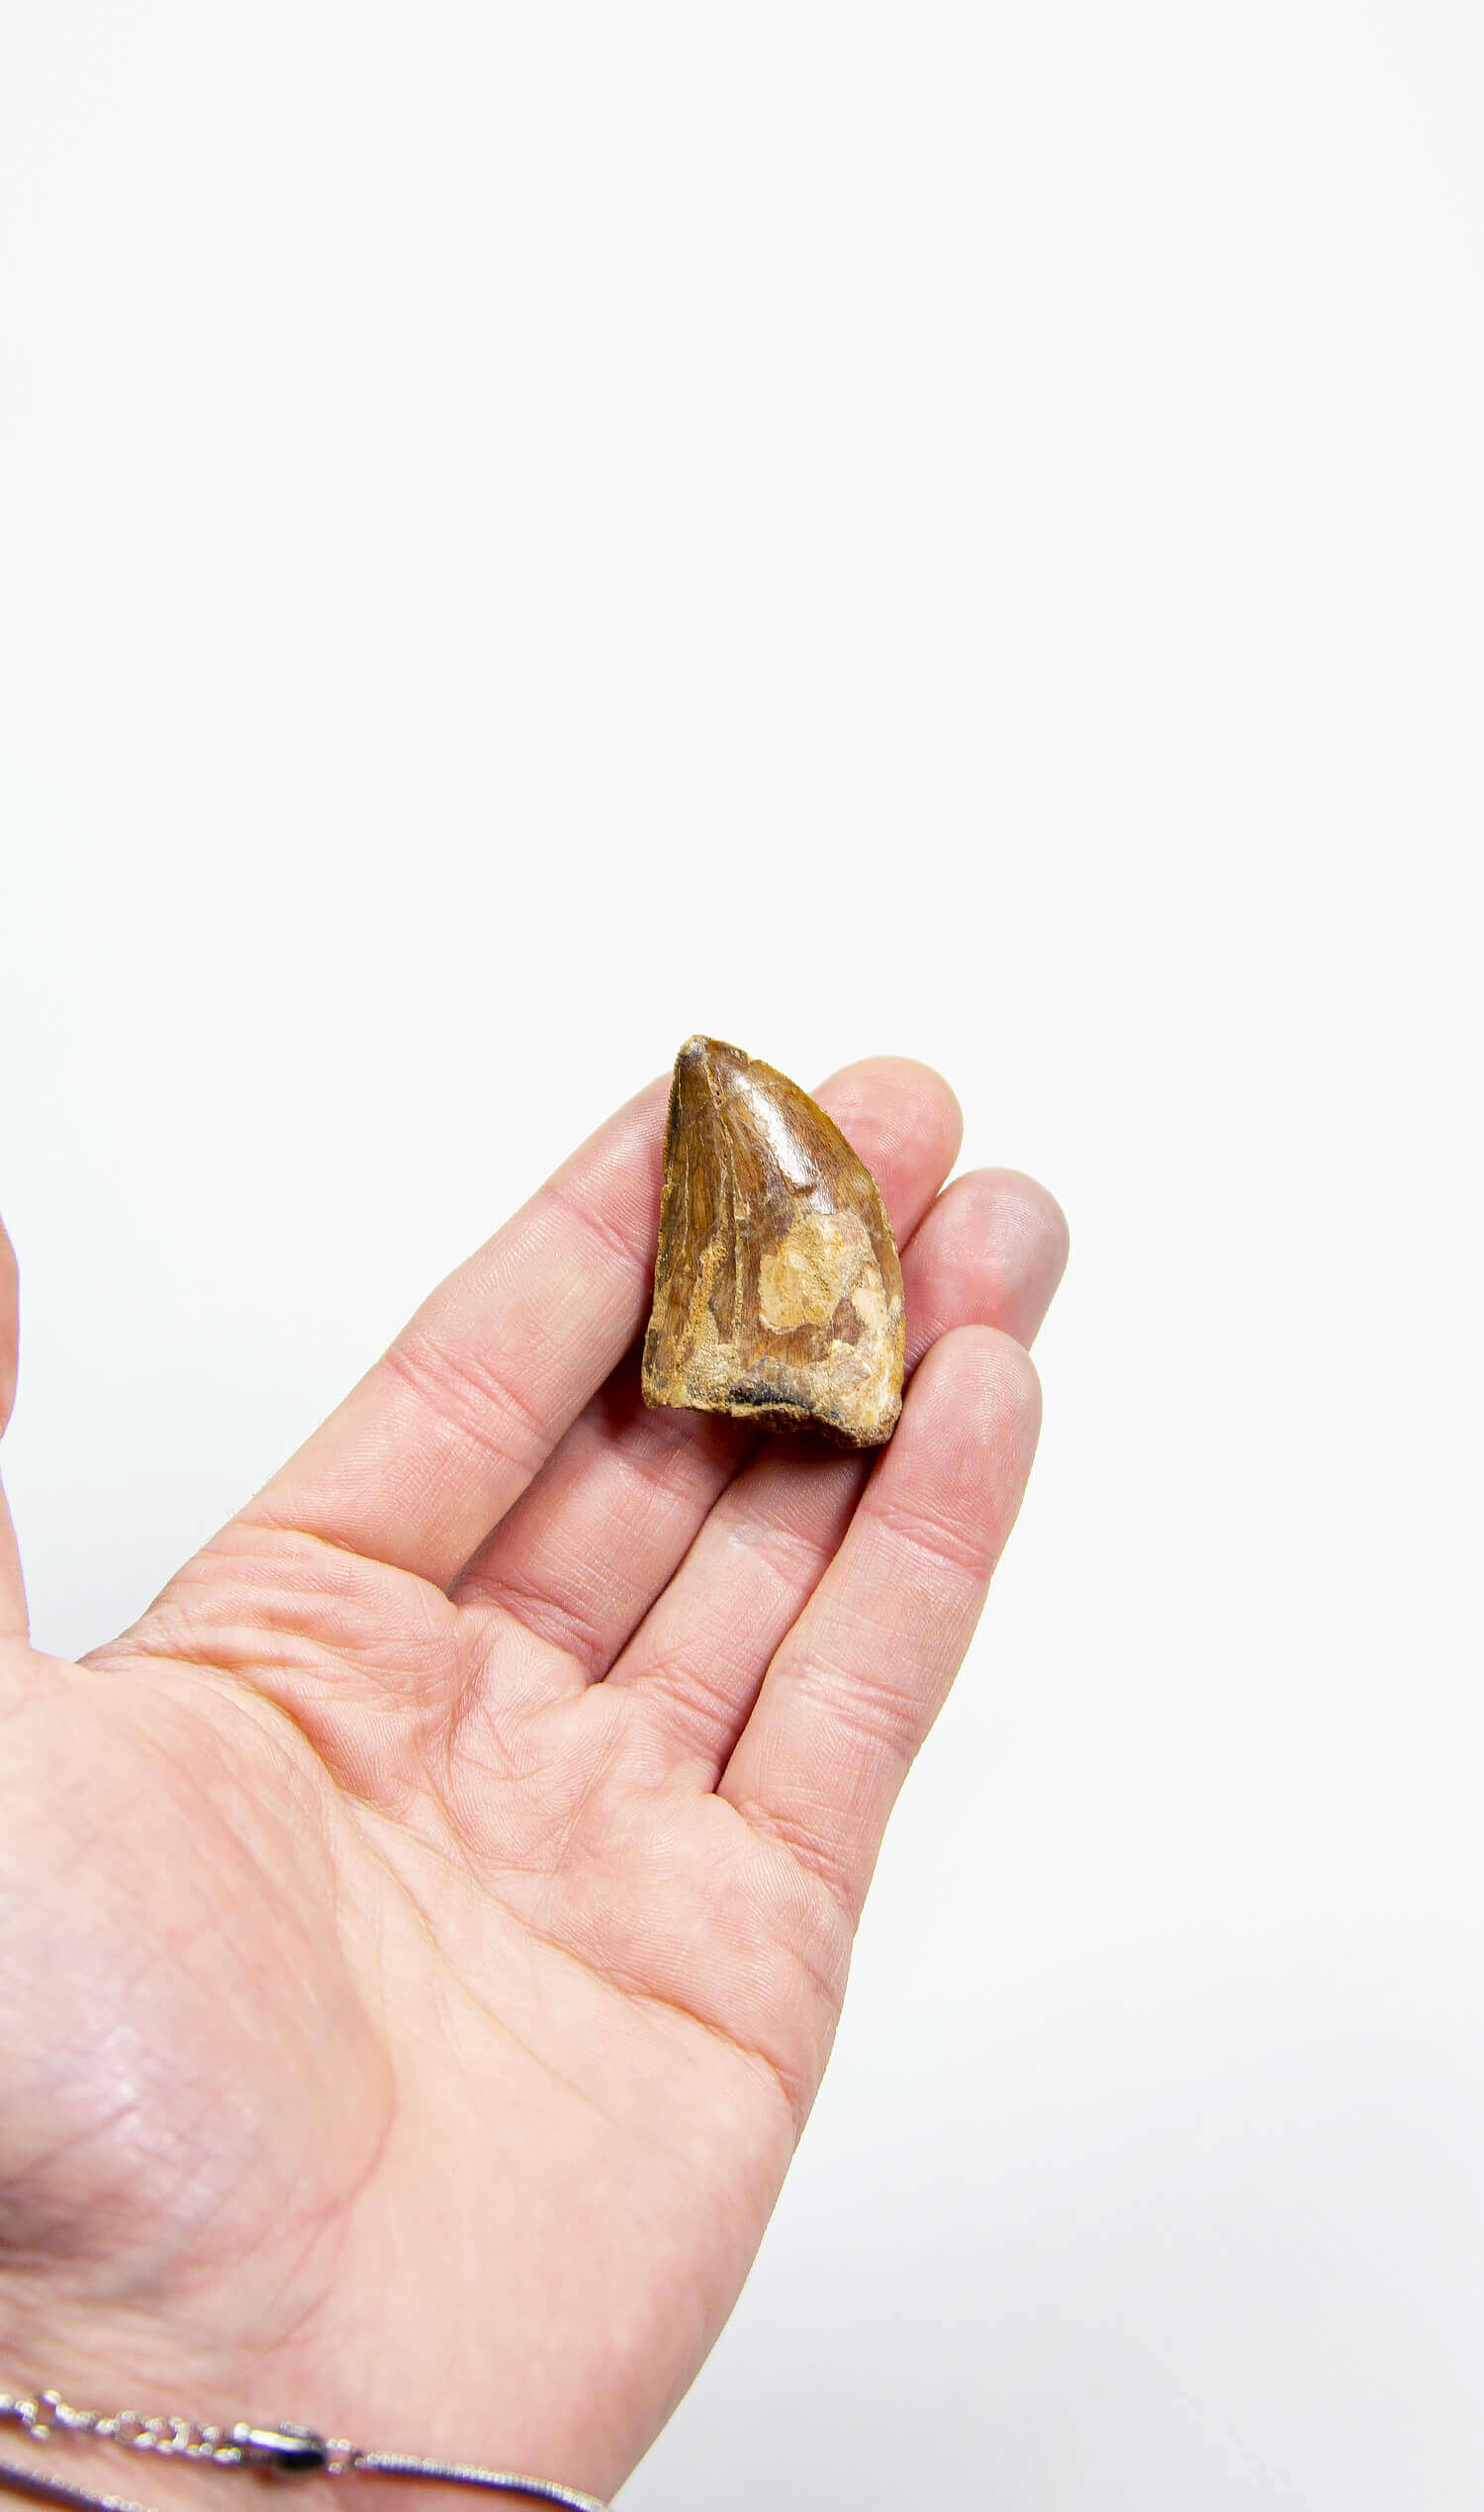 real fossil dinosaur carcharodontosaurus tooth for sale at the uk fossil store 57